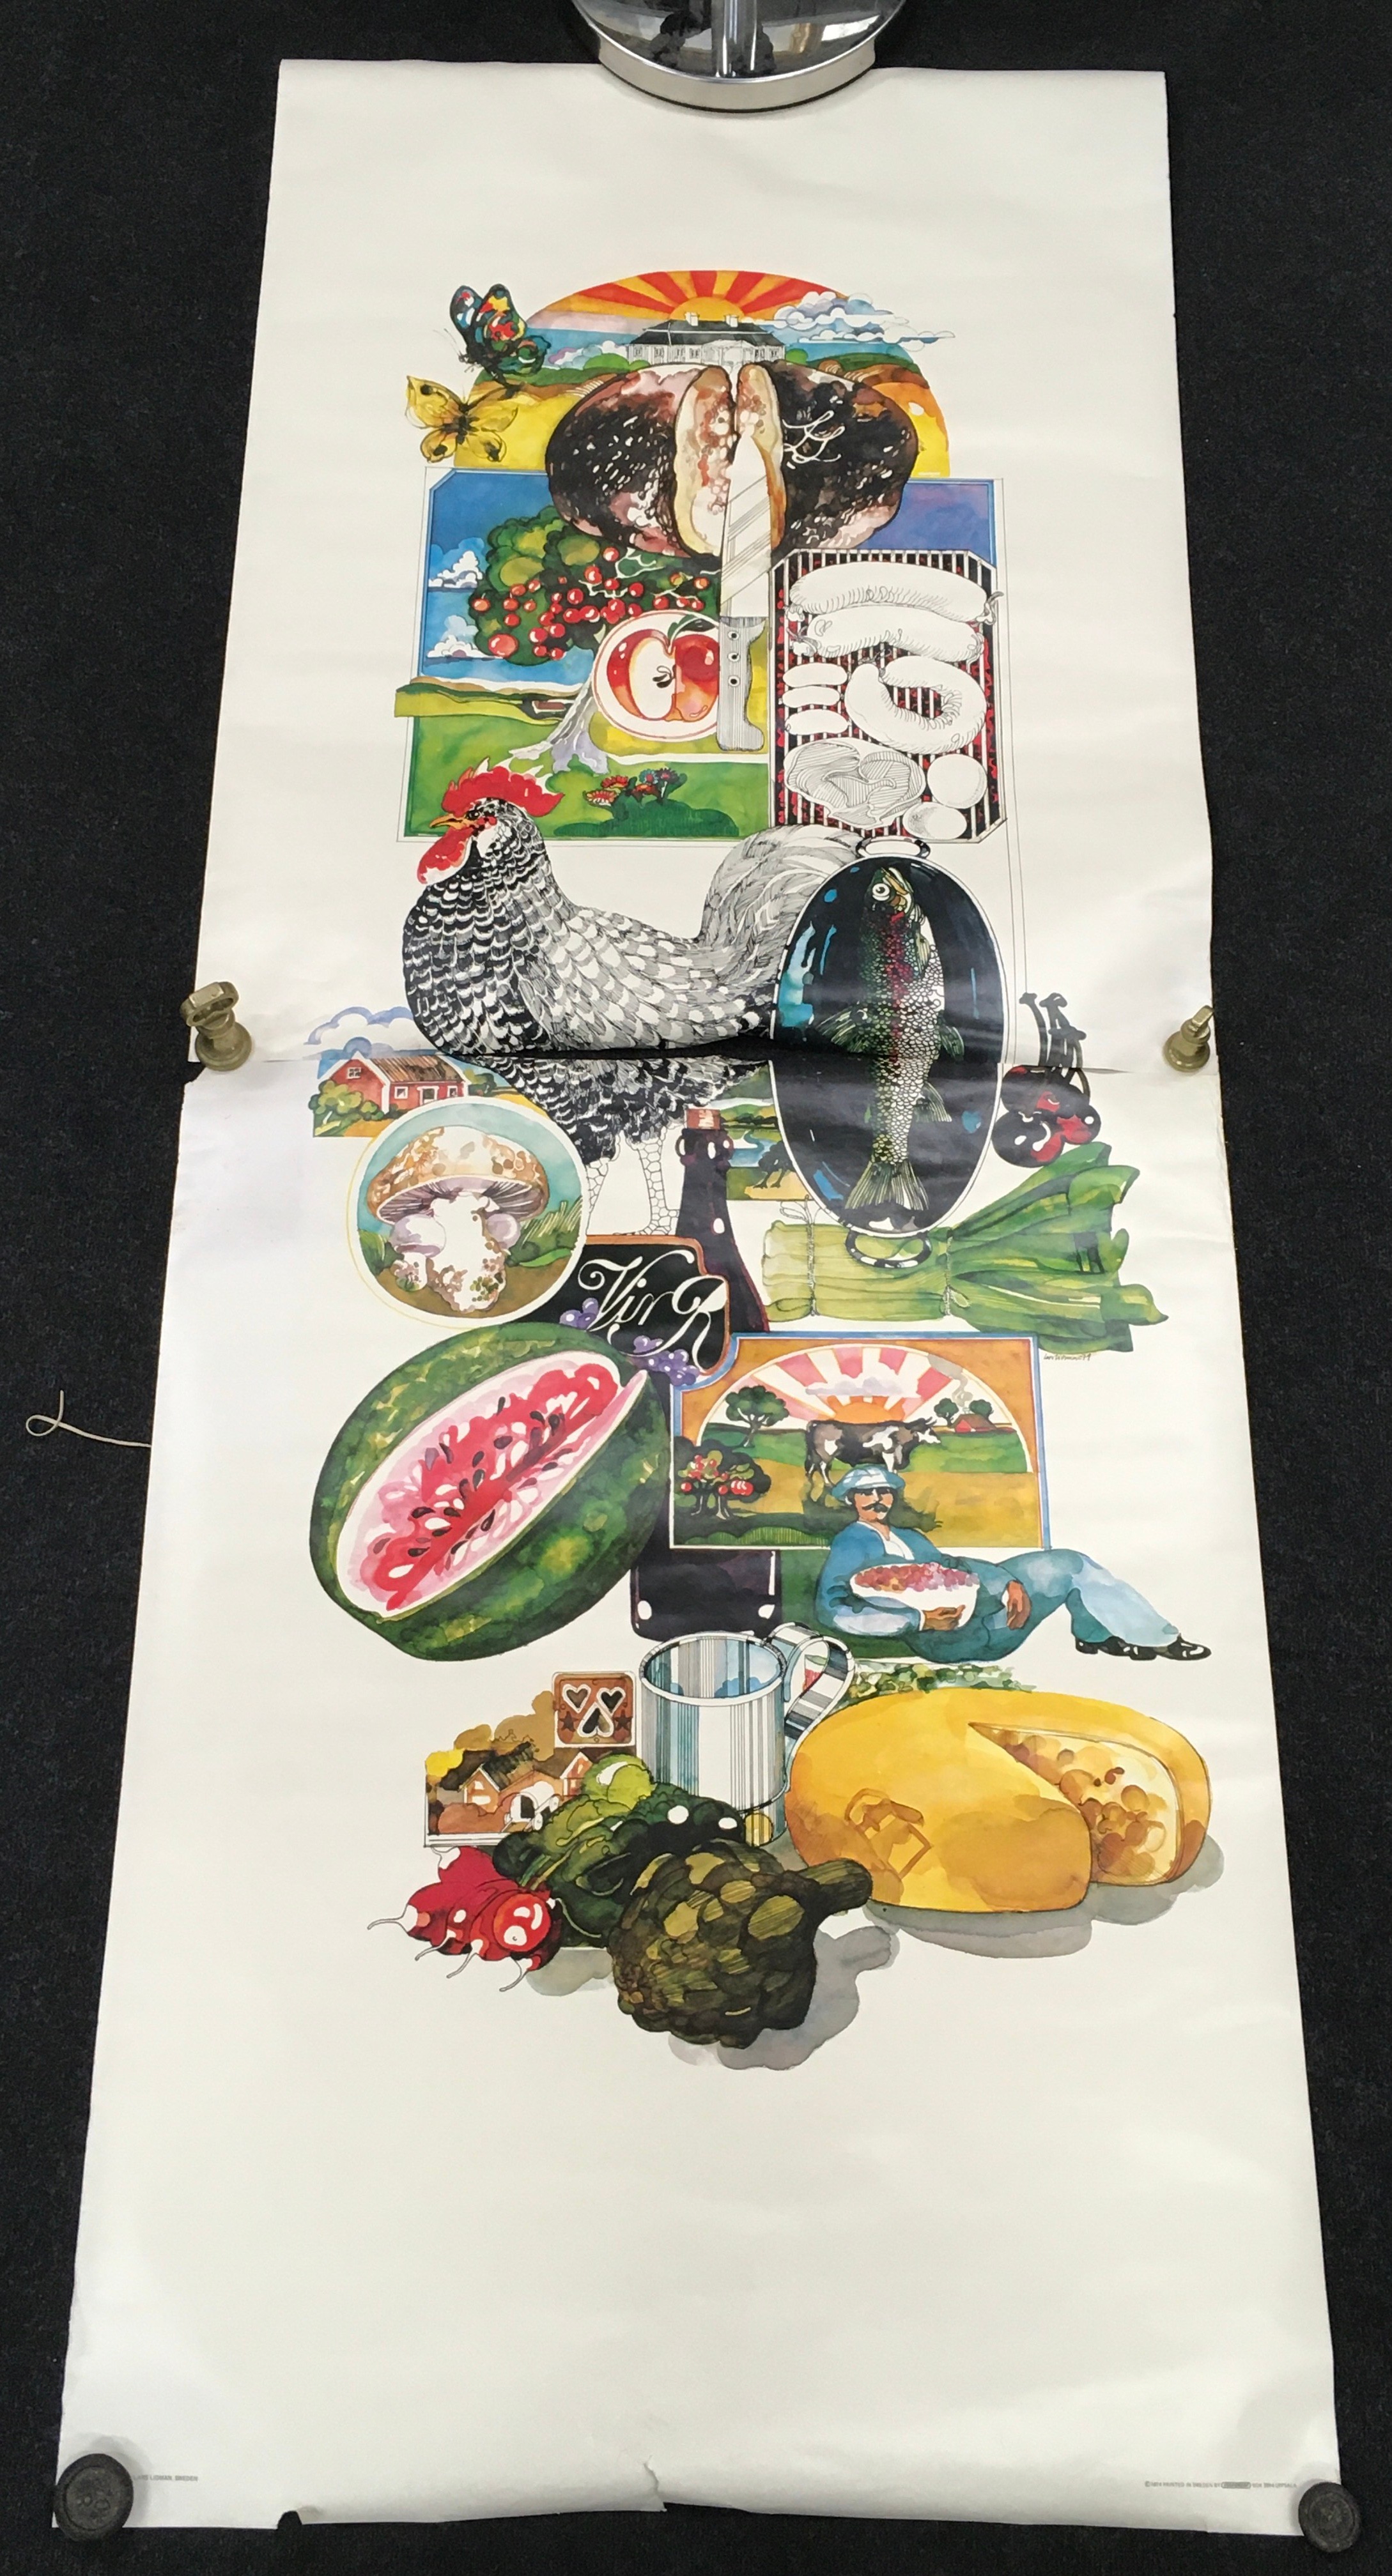 Scandecor vintage 1970's food advertising exhibition poster in two parts. Artist Lars Lidman